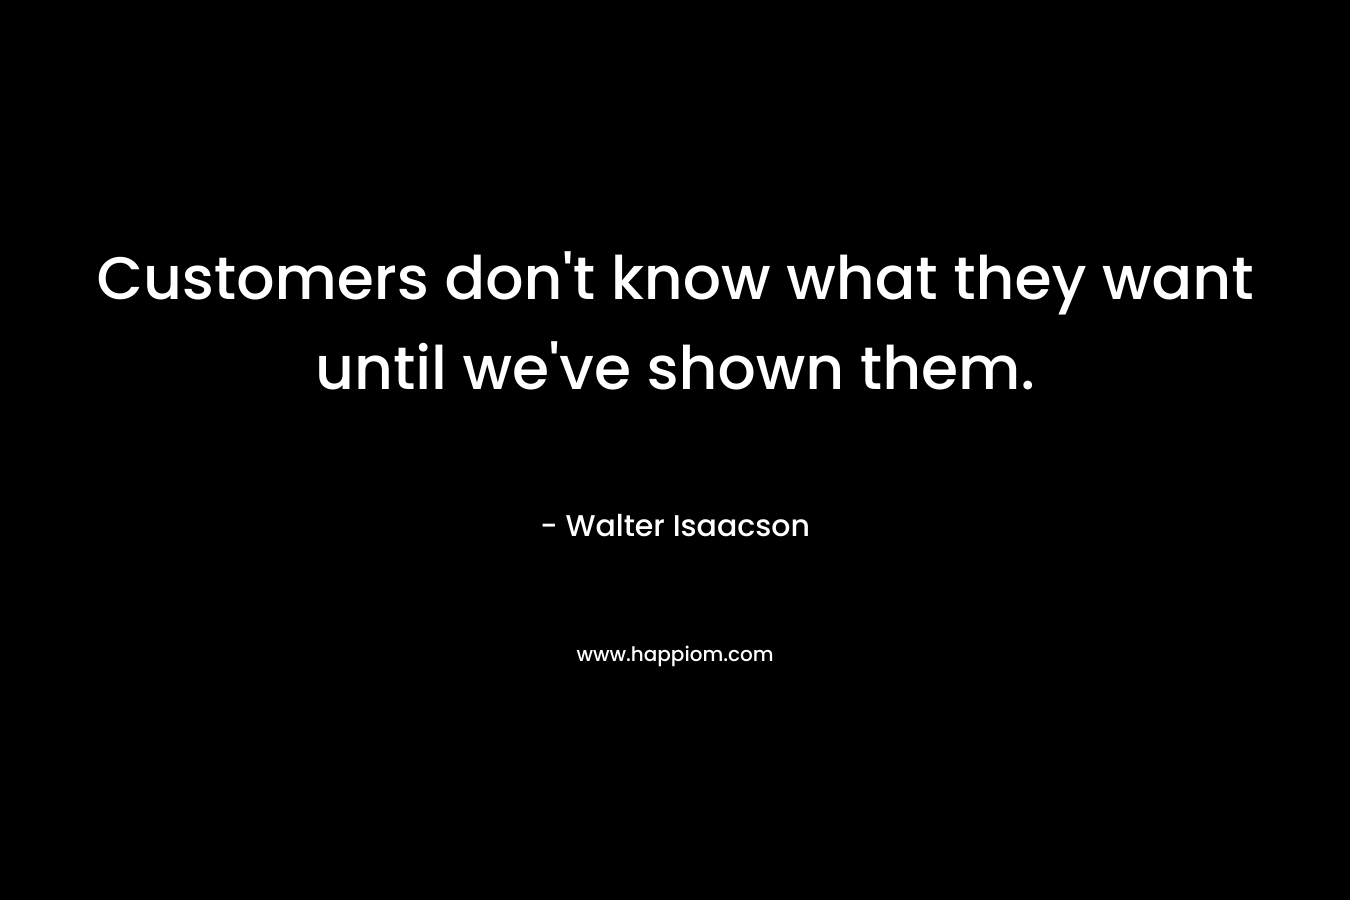 Customers don’t know what they want until we’ve shown them. – Walter Isaacson